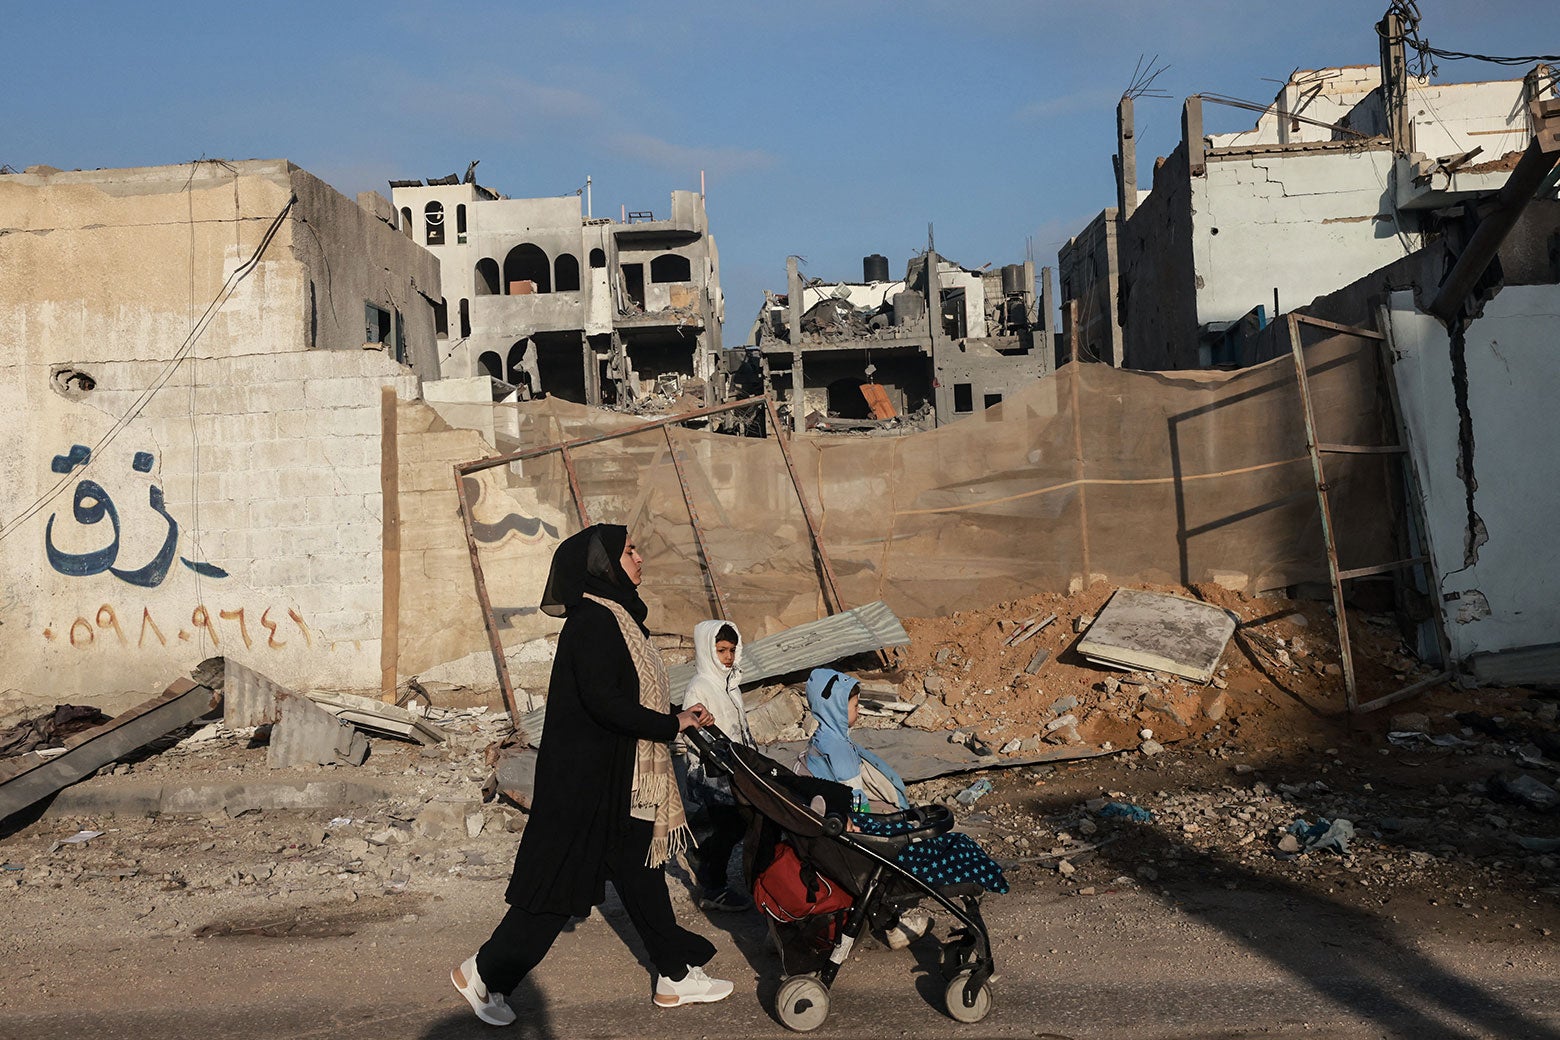 A woman walking with two small children pushes a stroller past ruined buildings.